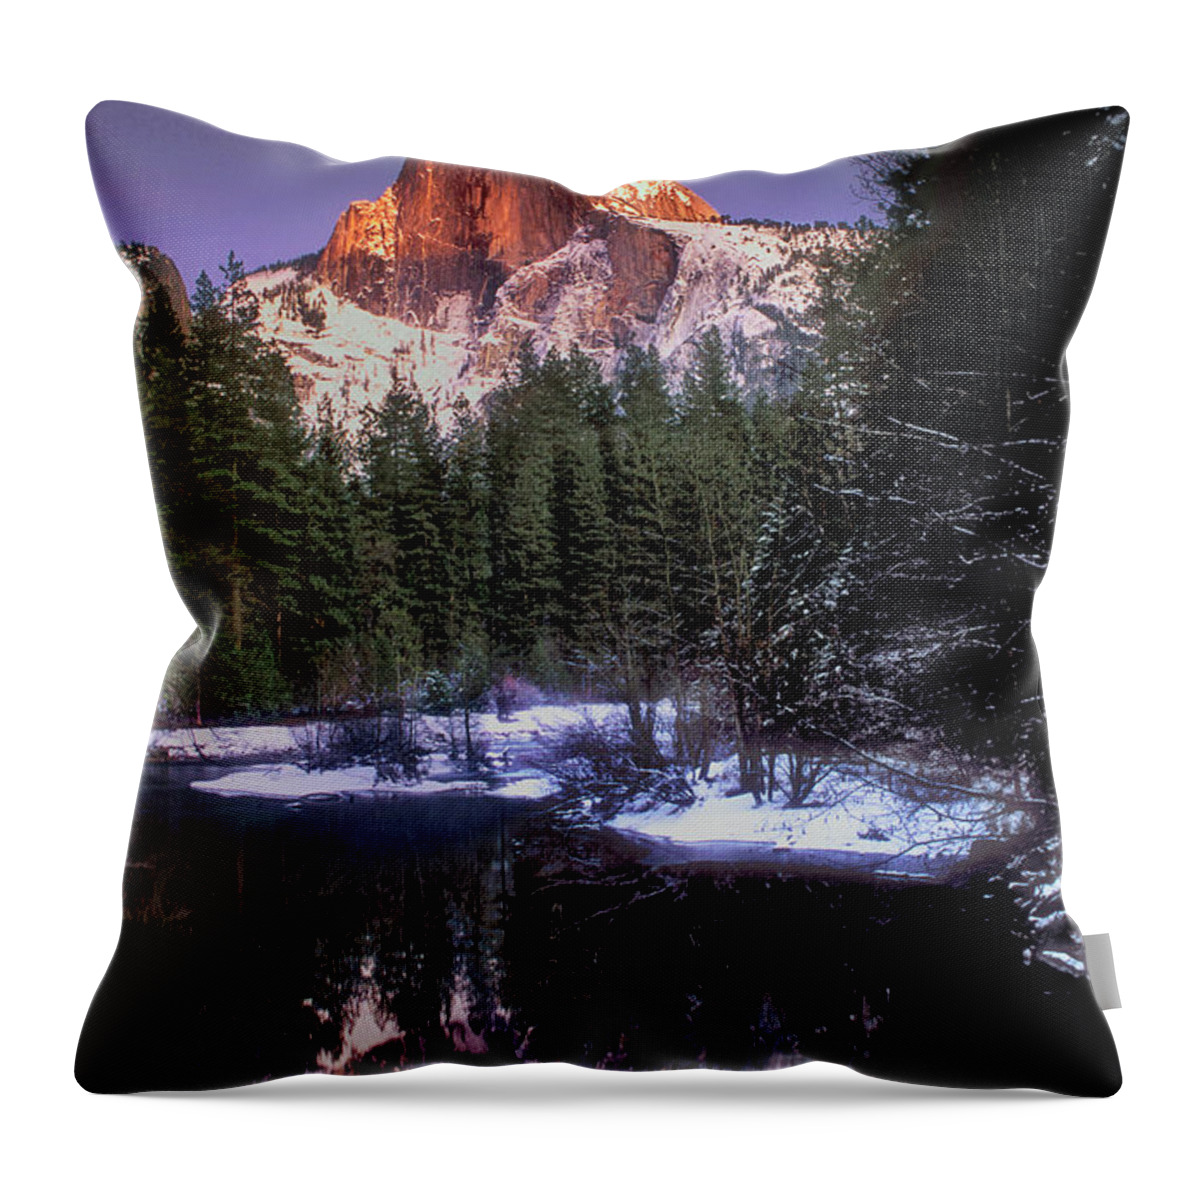 Dave Welling Throw Pillow featuring the photograph Half Dome Winteer Reflection Yosemite National Park by Dave Welling